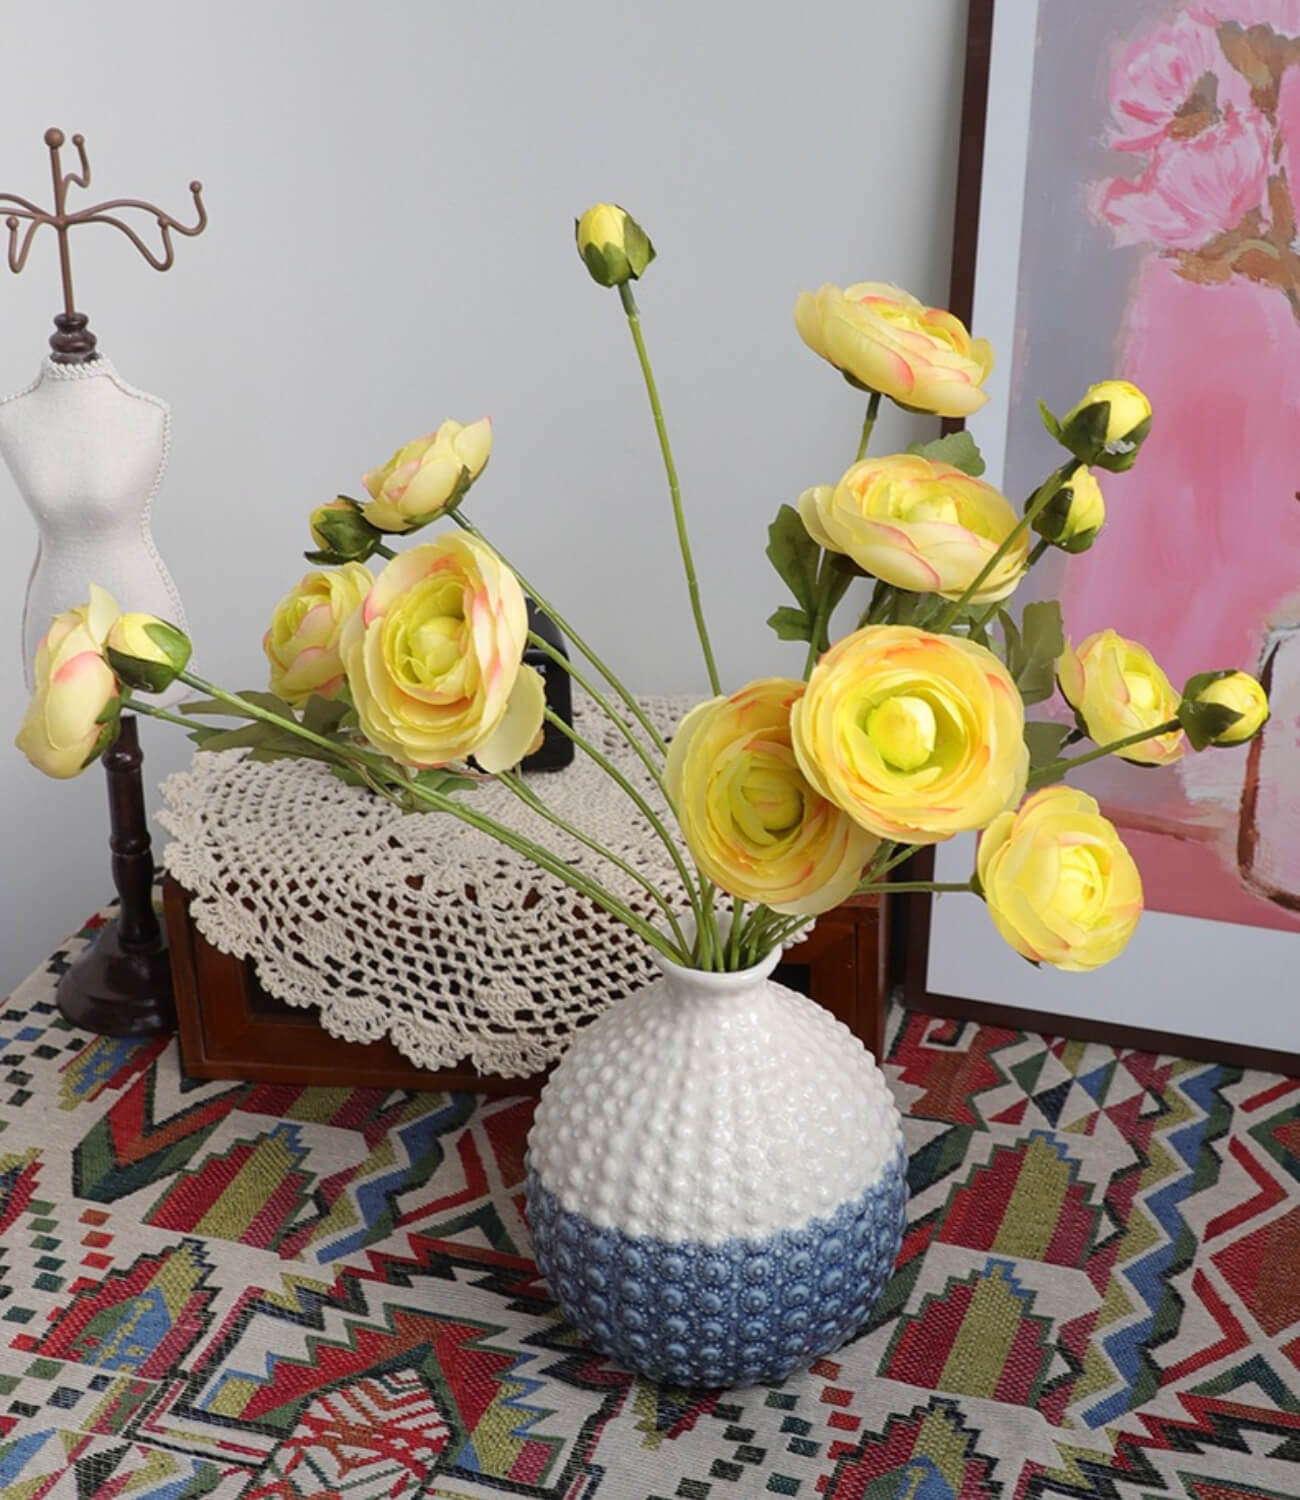 An artistic ceramic vase, blooming with a gentle sea of flowers, dreamlike and enchanting.